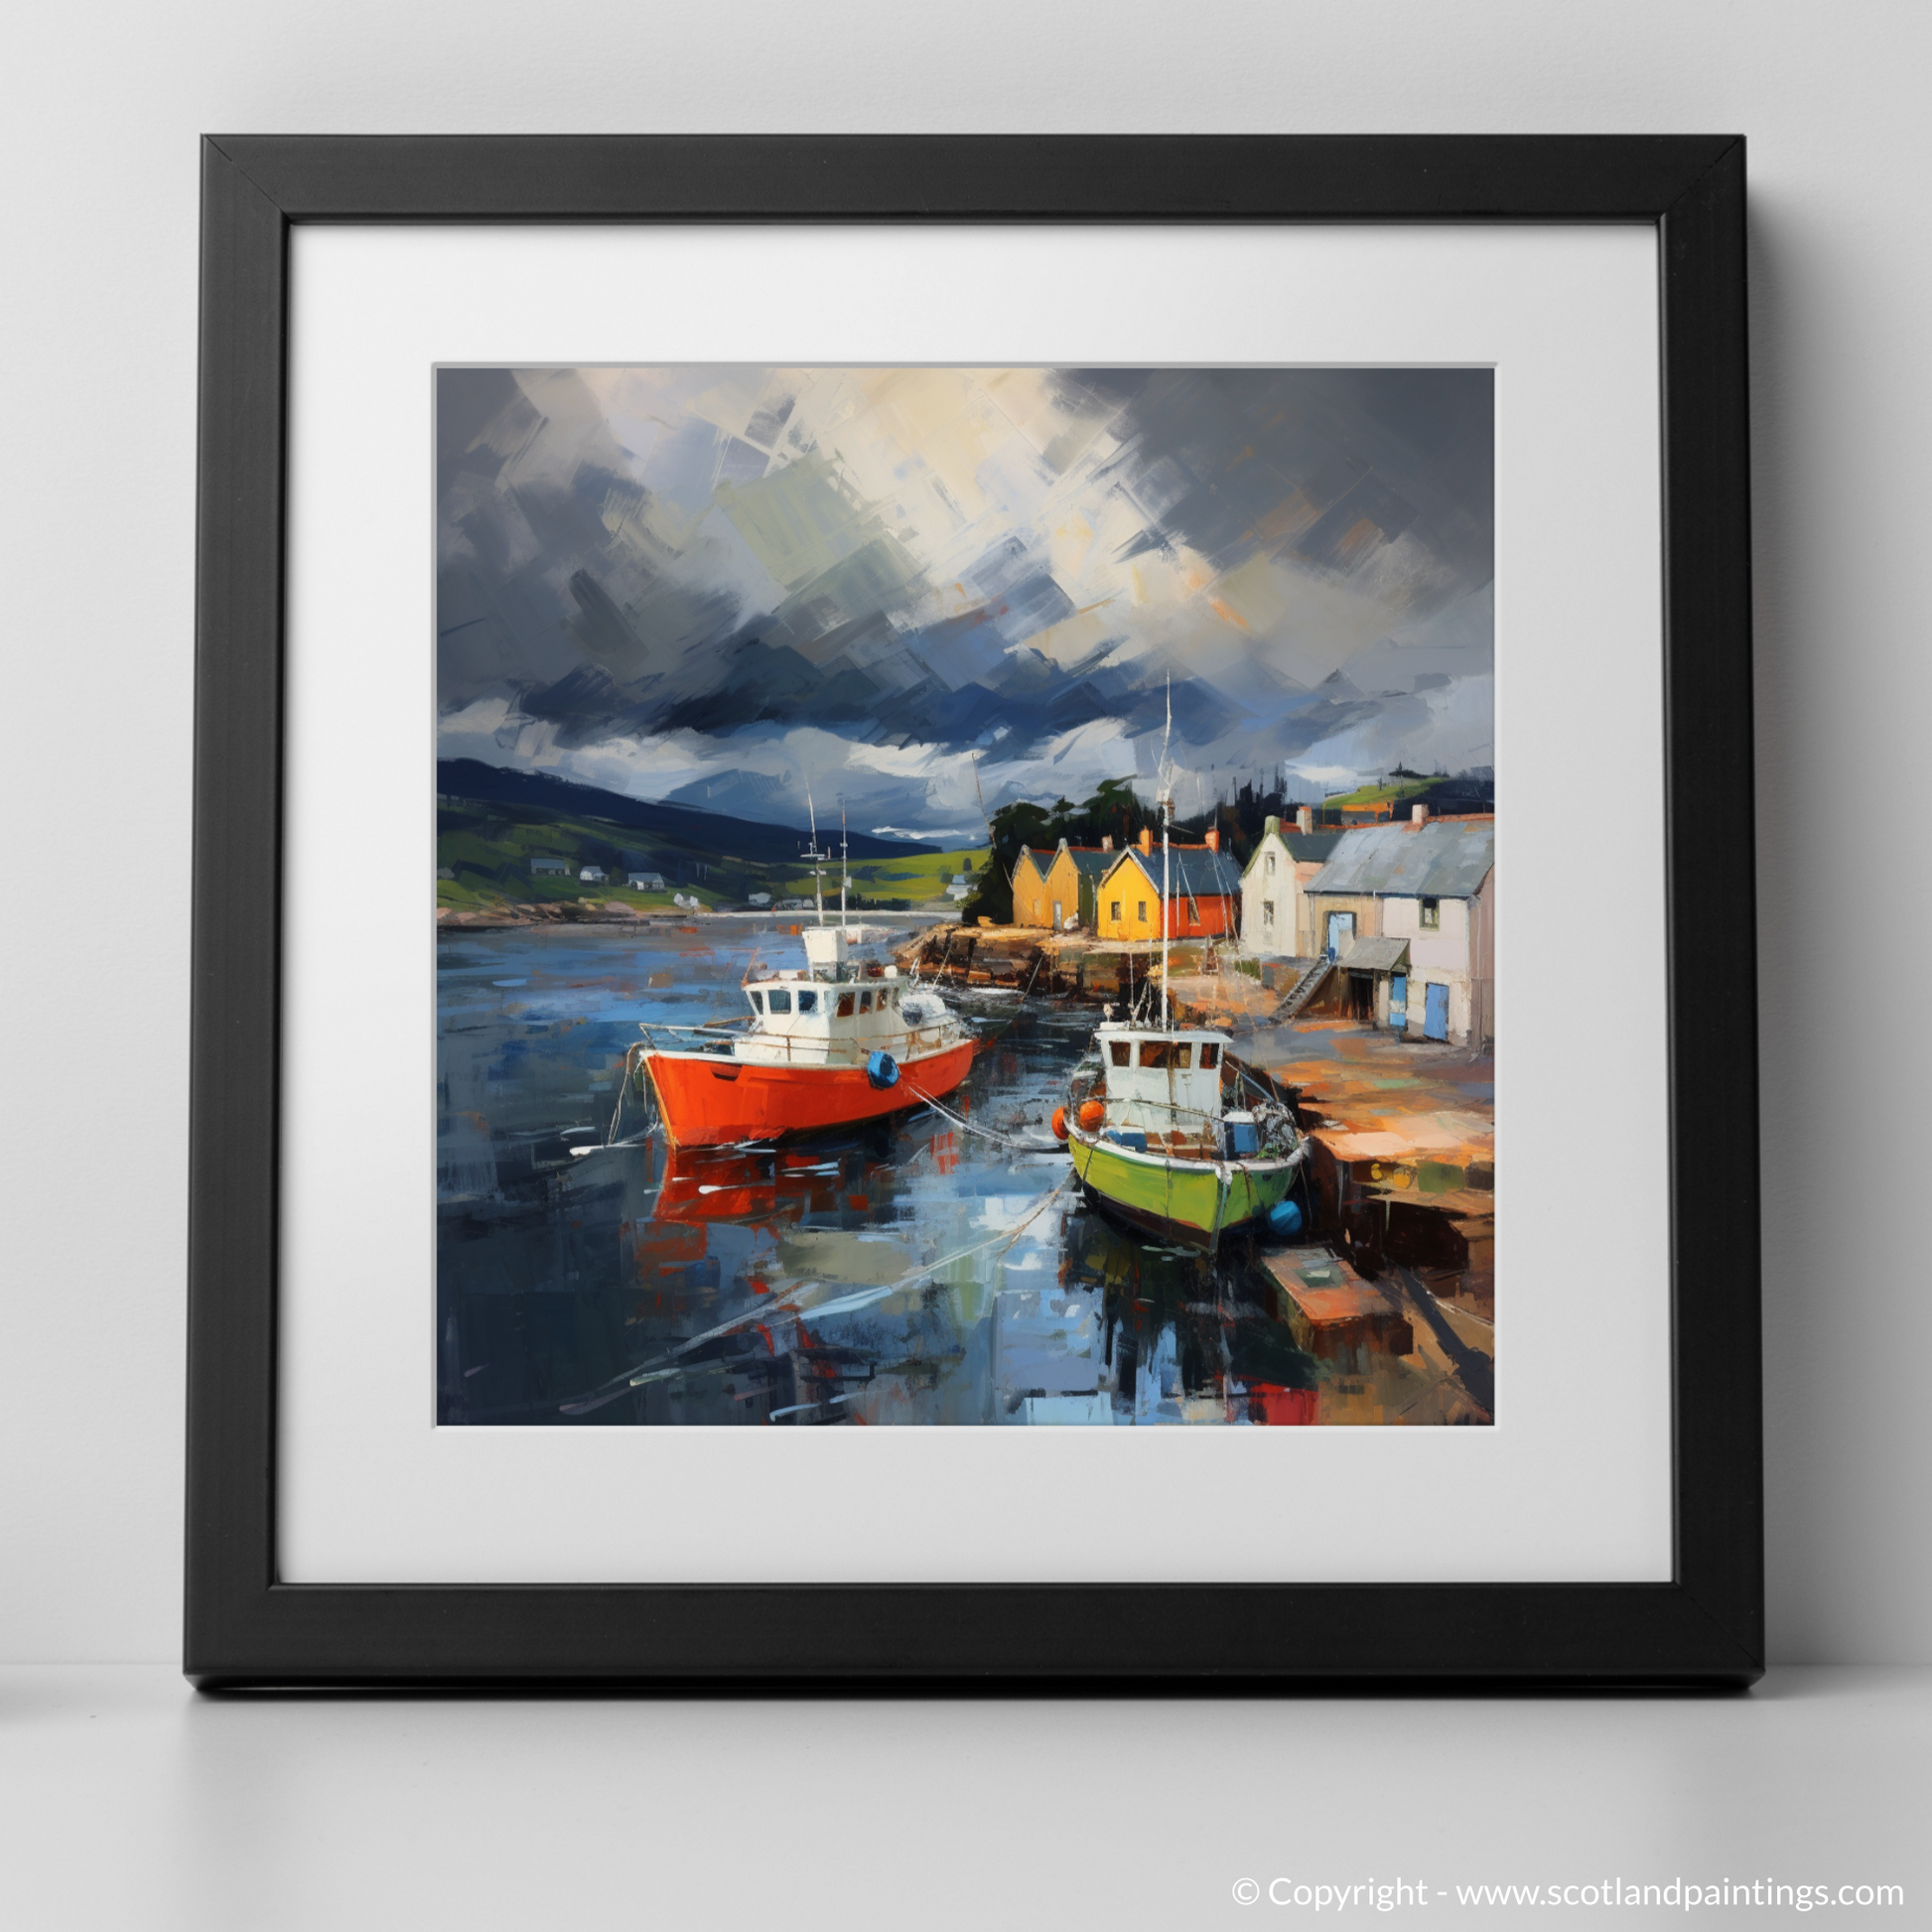 Art Print of Cromarty Harbour with a stormy sky with a black frame